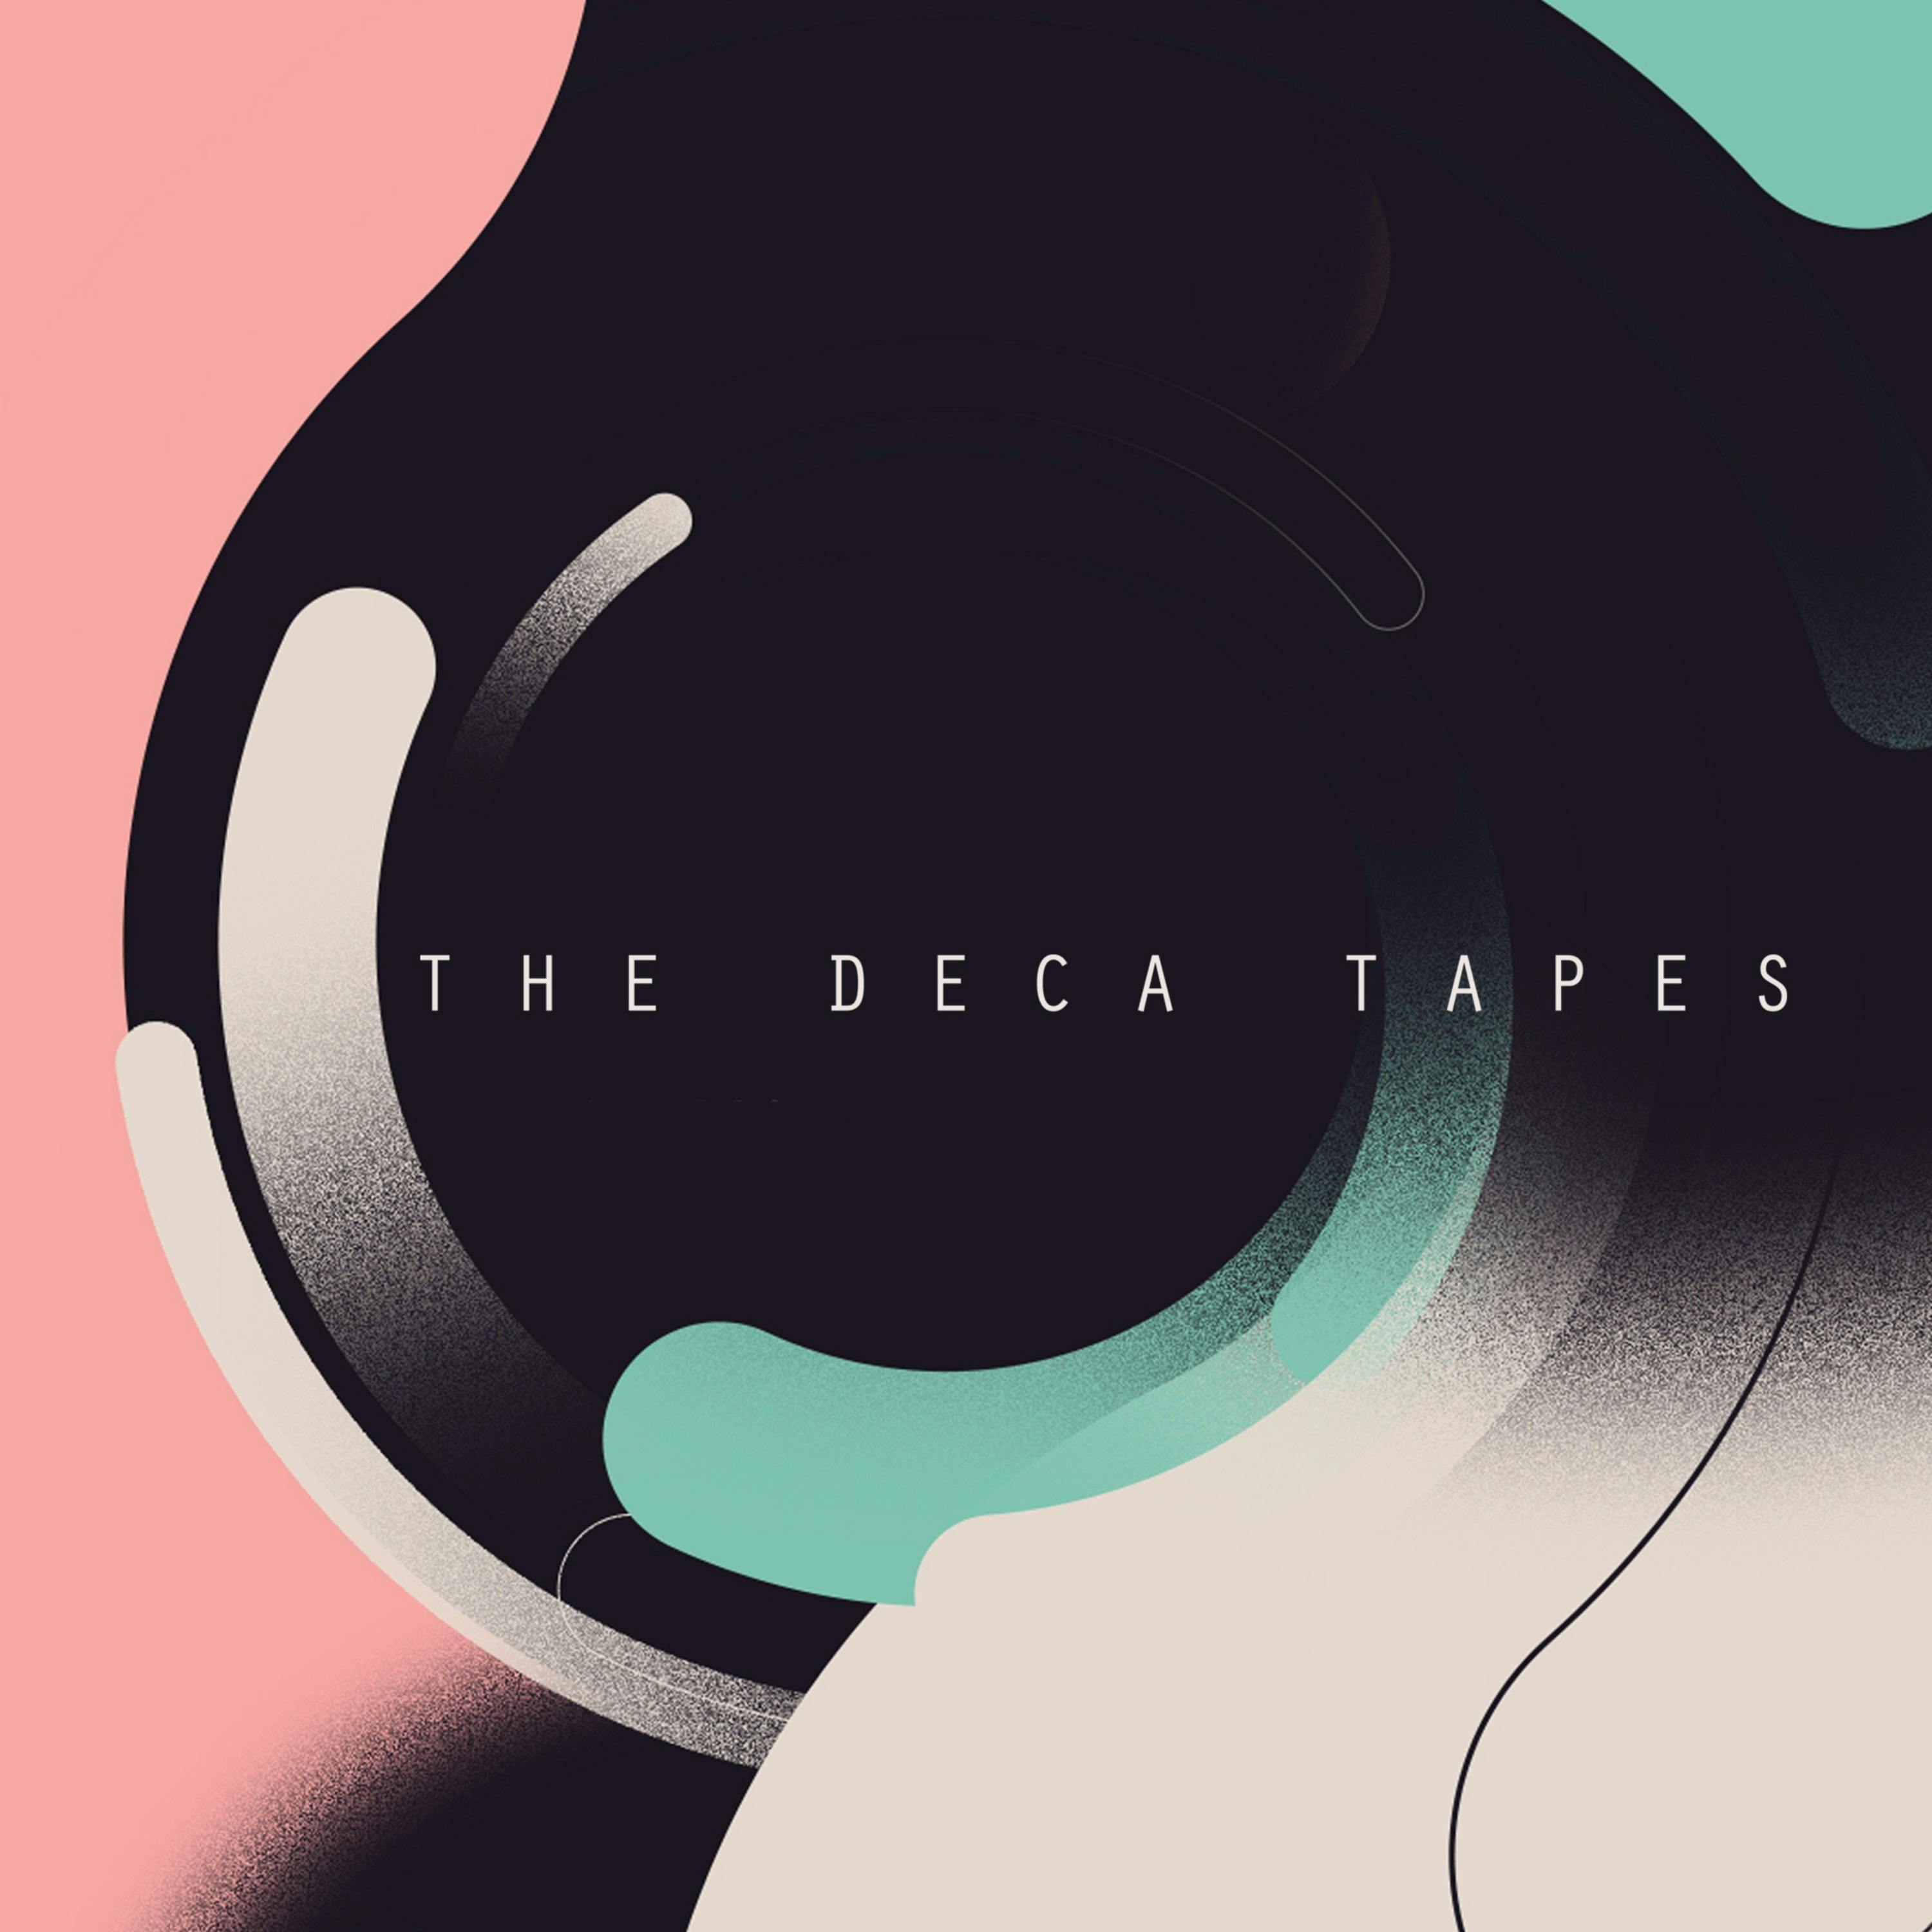 The Deca Tapes podcast show image